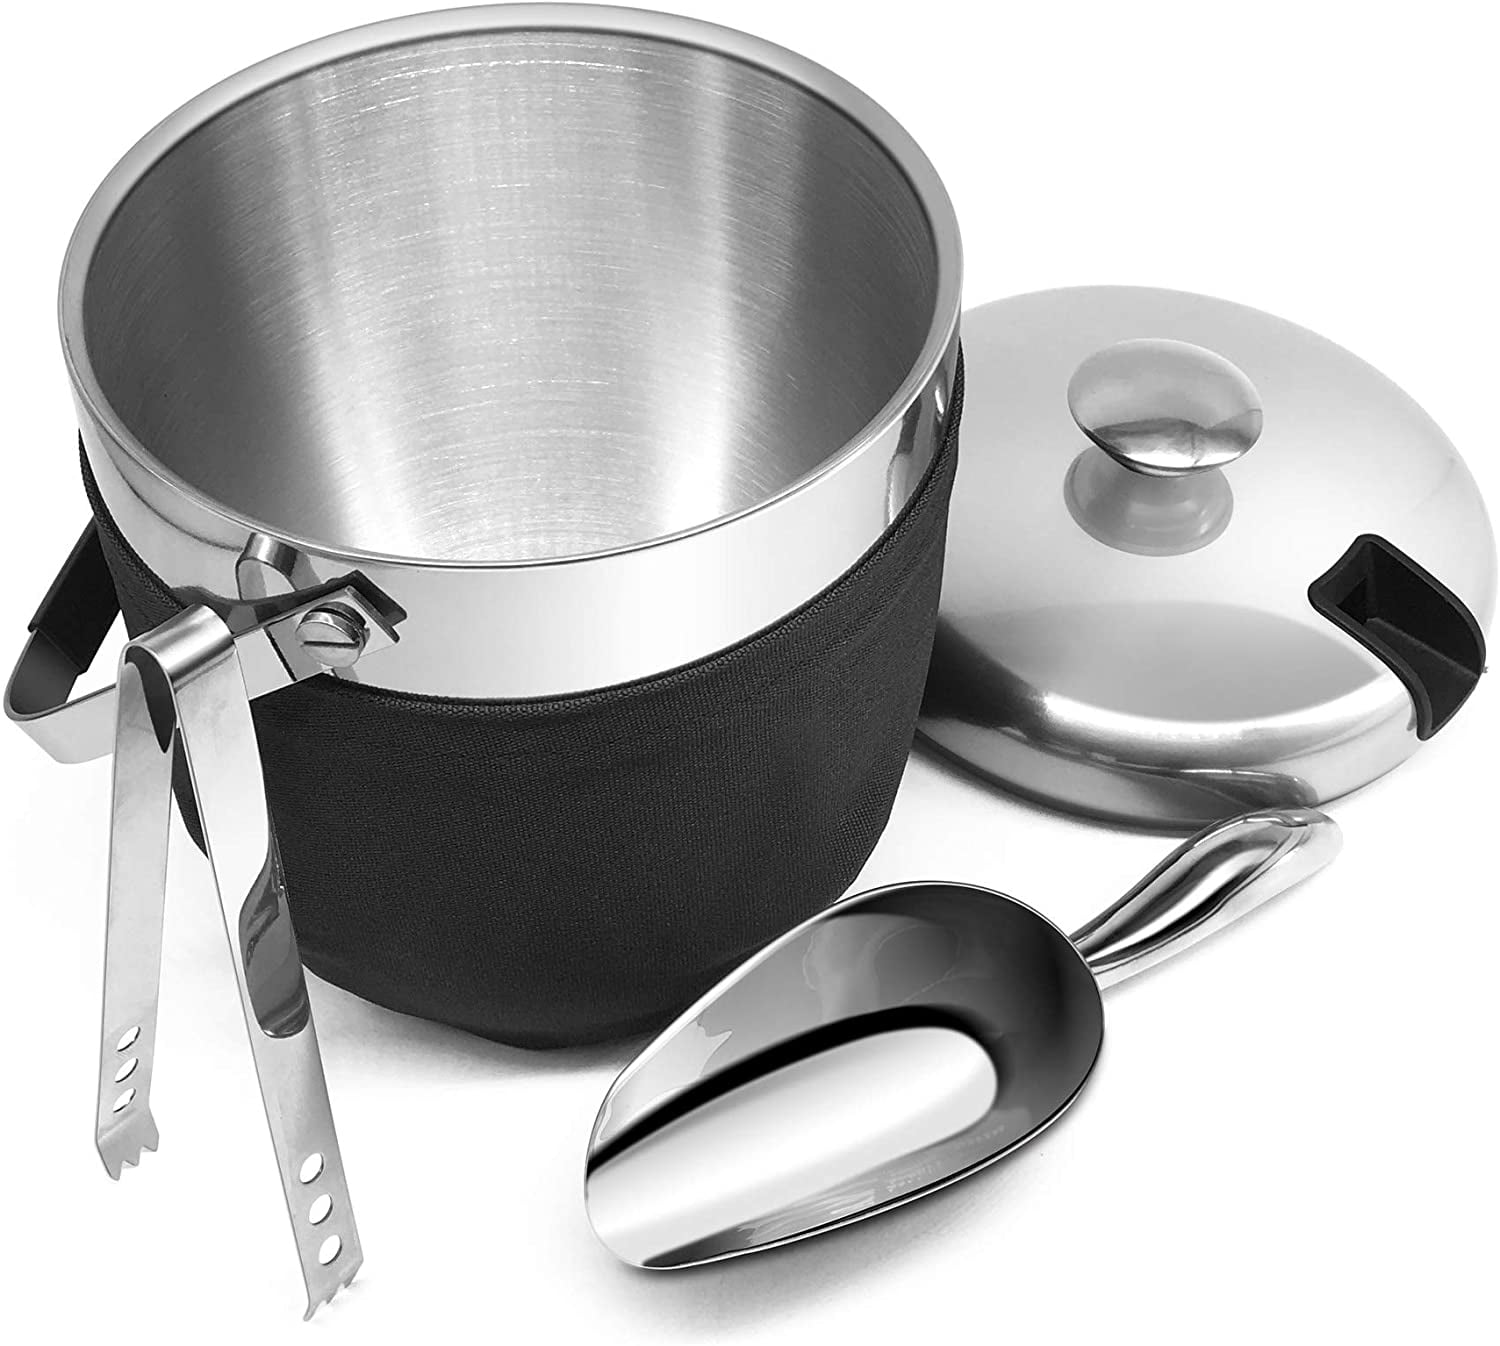 Stainless Steel Double Wall Insulated Silver 2.8 L with Lid & Tongs & Slotted Strainer & Silicone Handle Pad Ice Bucket for Cocktail Bar